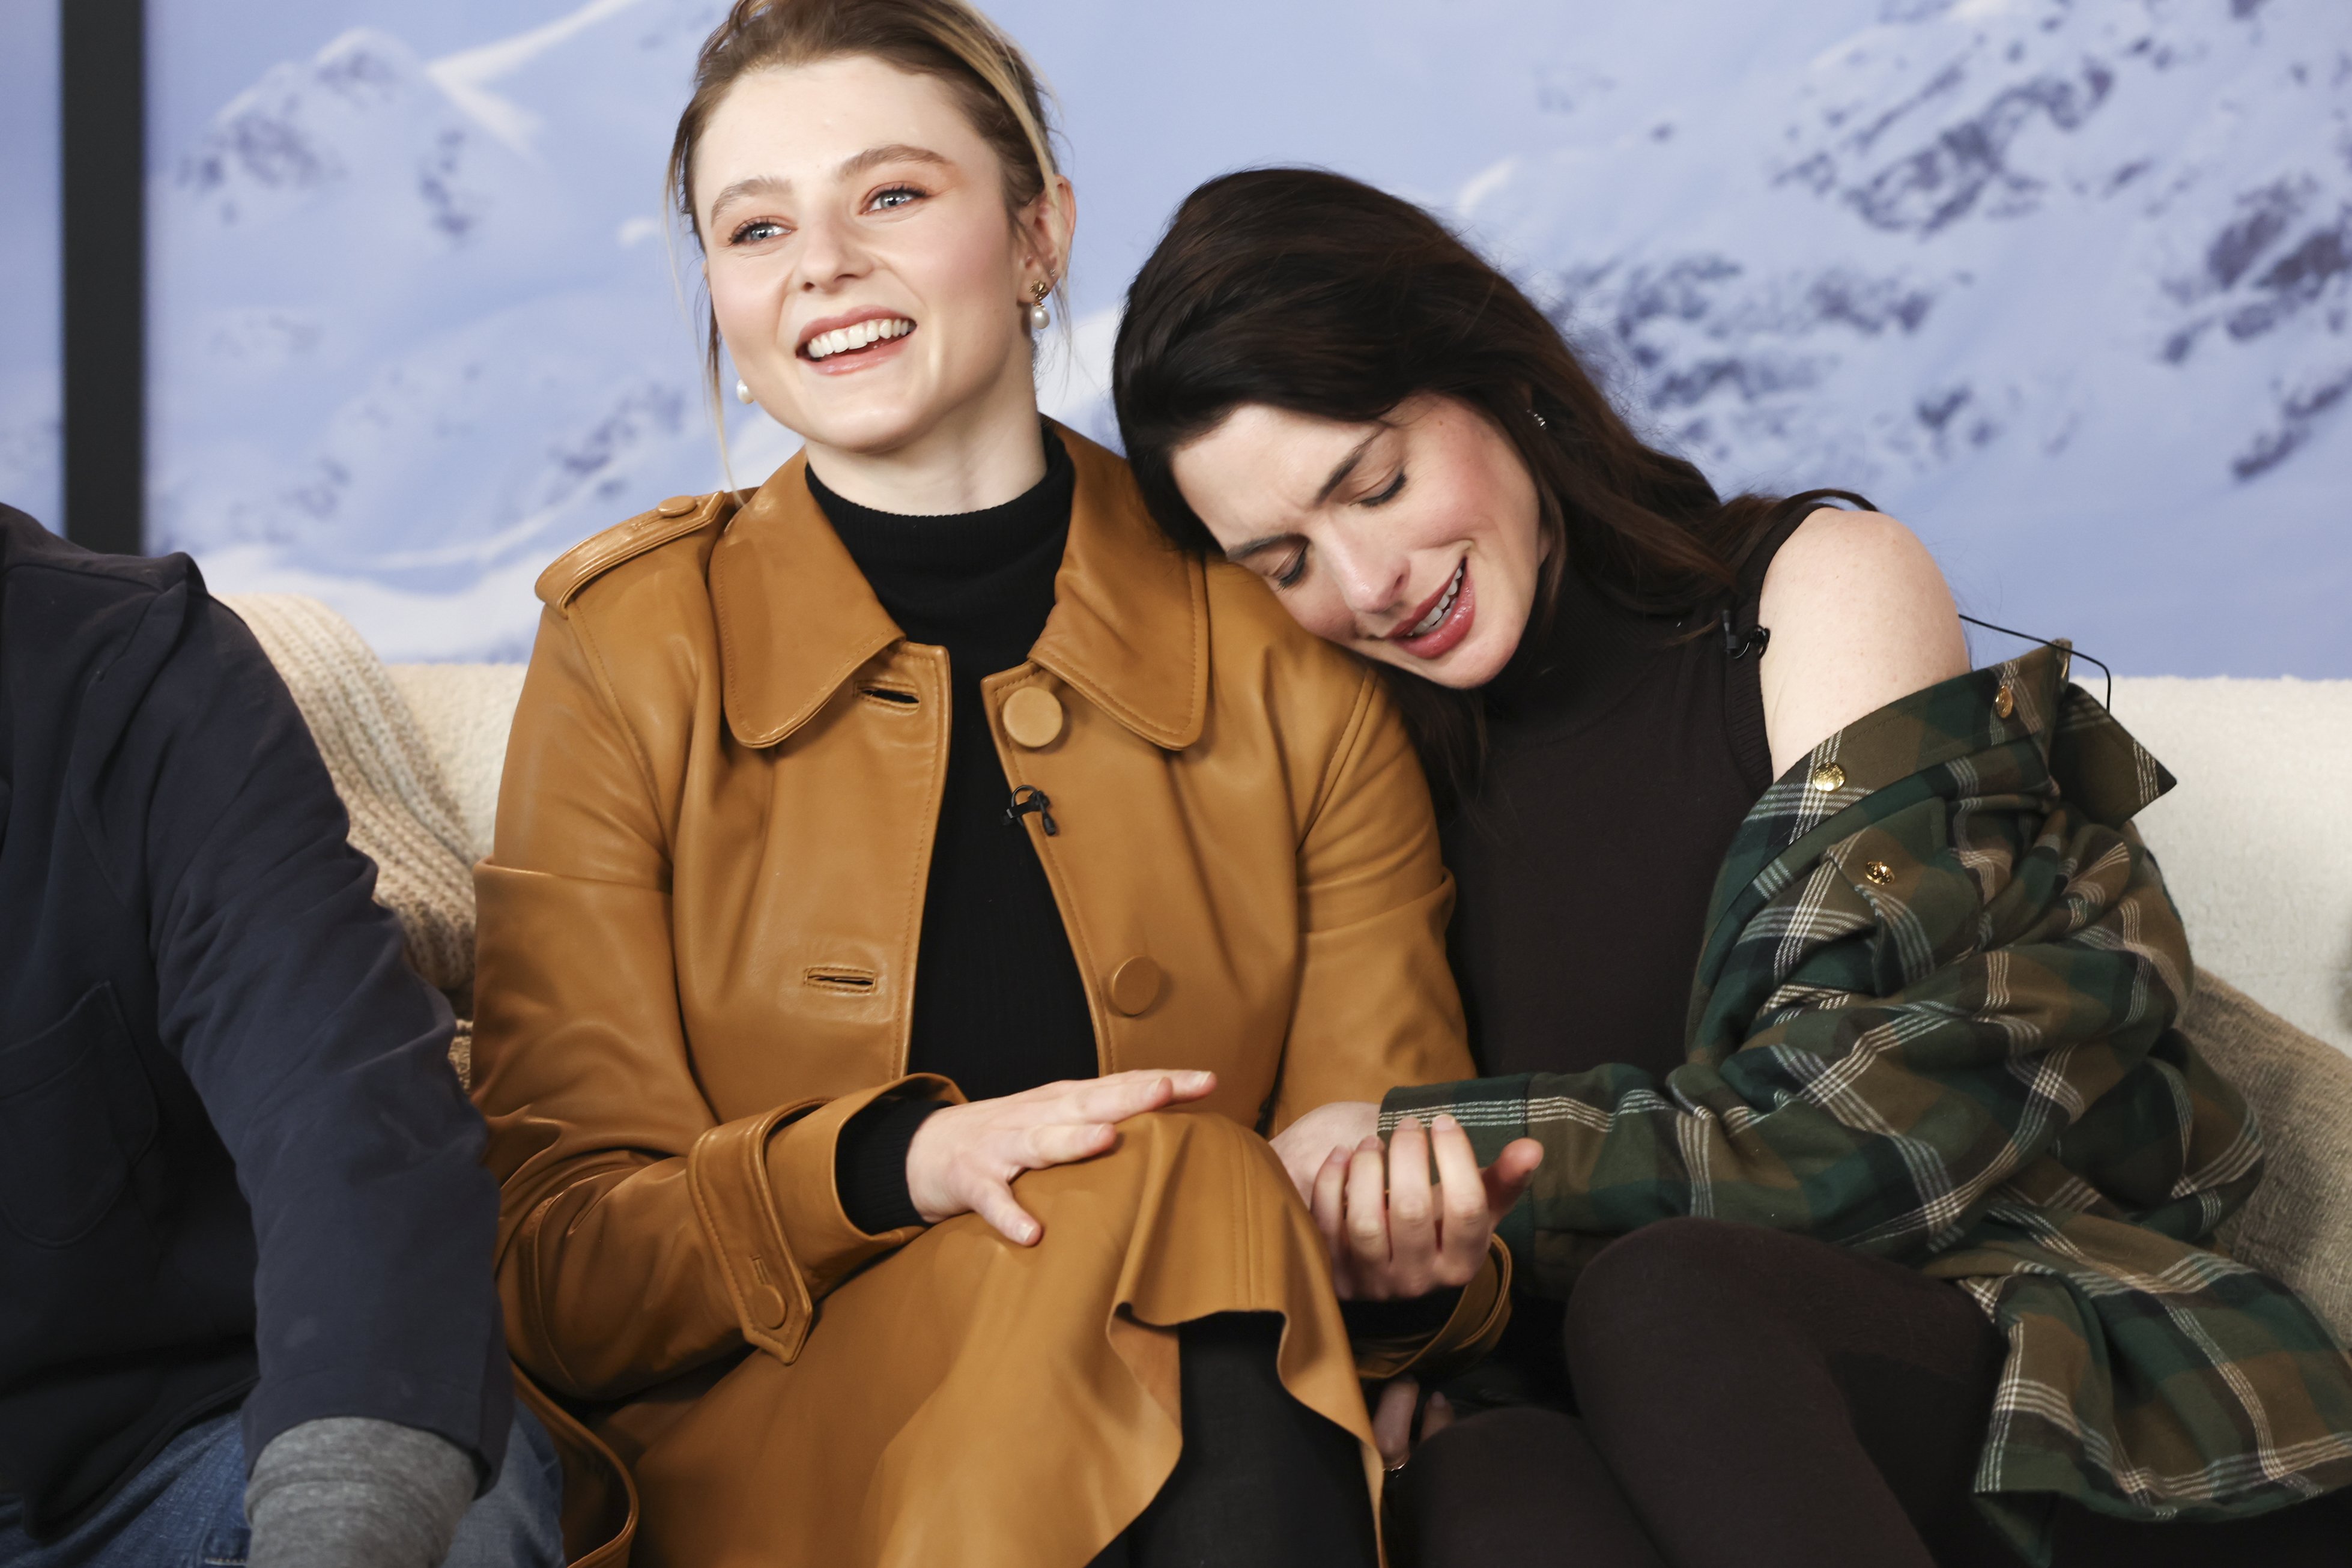 Thomasin McKenzie and Anne Hathaway at the Variety Sundance Studio, on January 21, 2023, in Park City, Utah. | Source: Getty Images